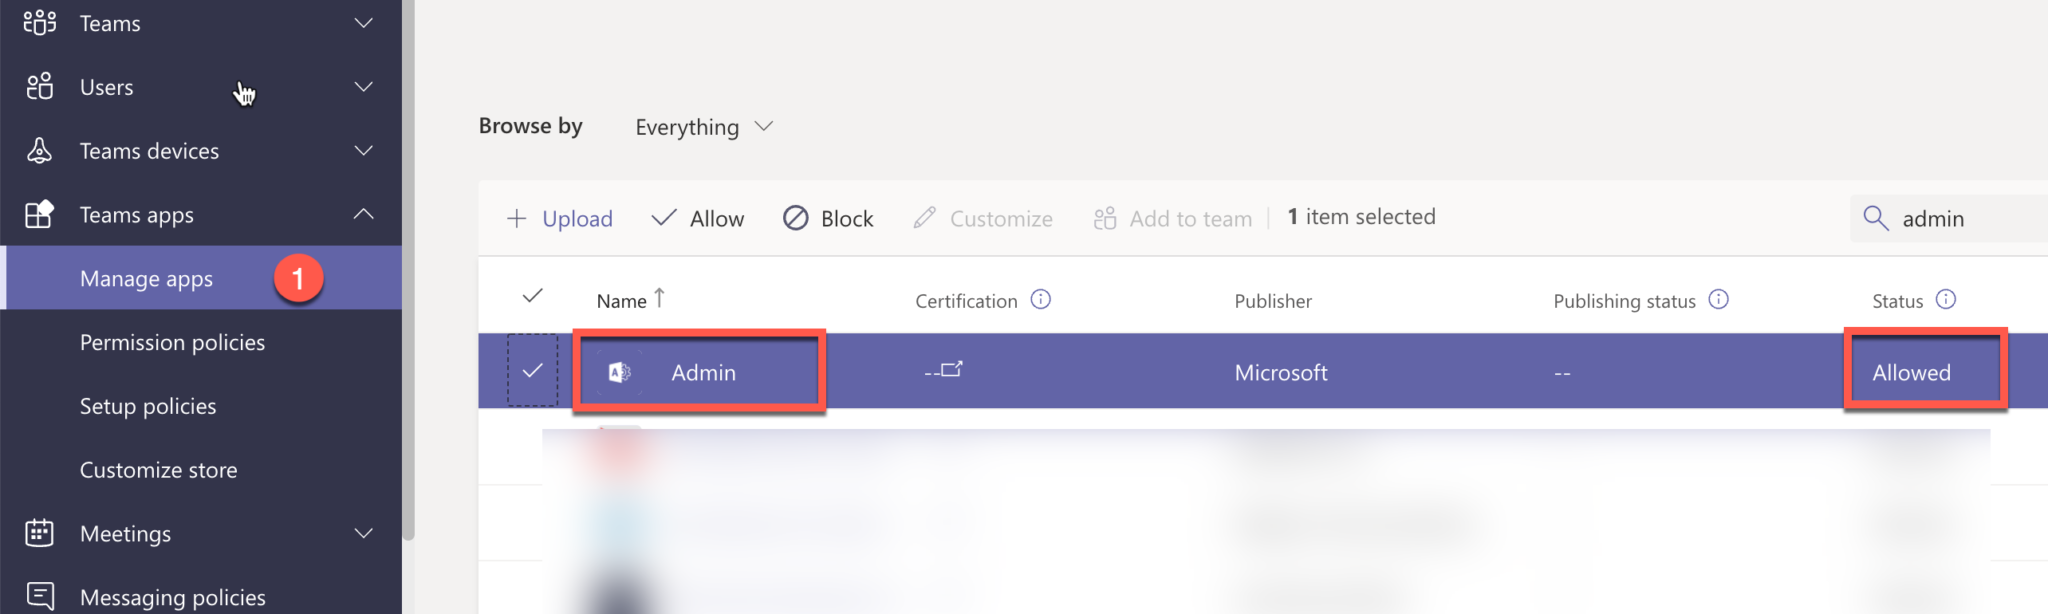 How to manage M365 portal directly from Microsoft Teams?